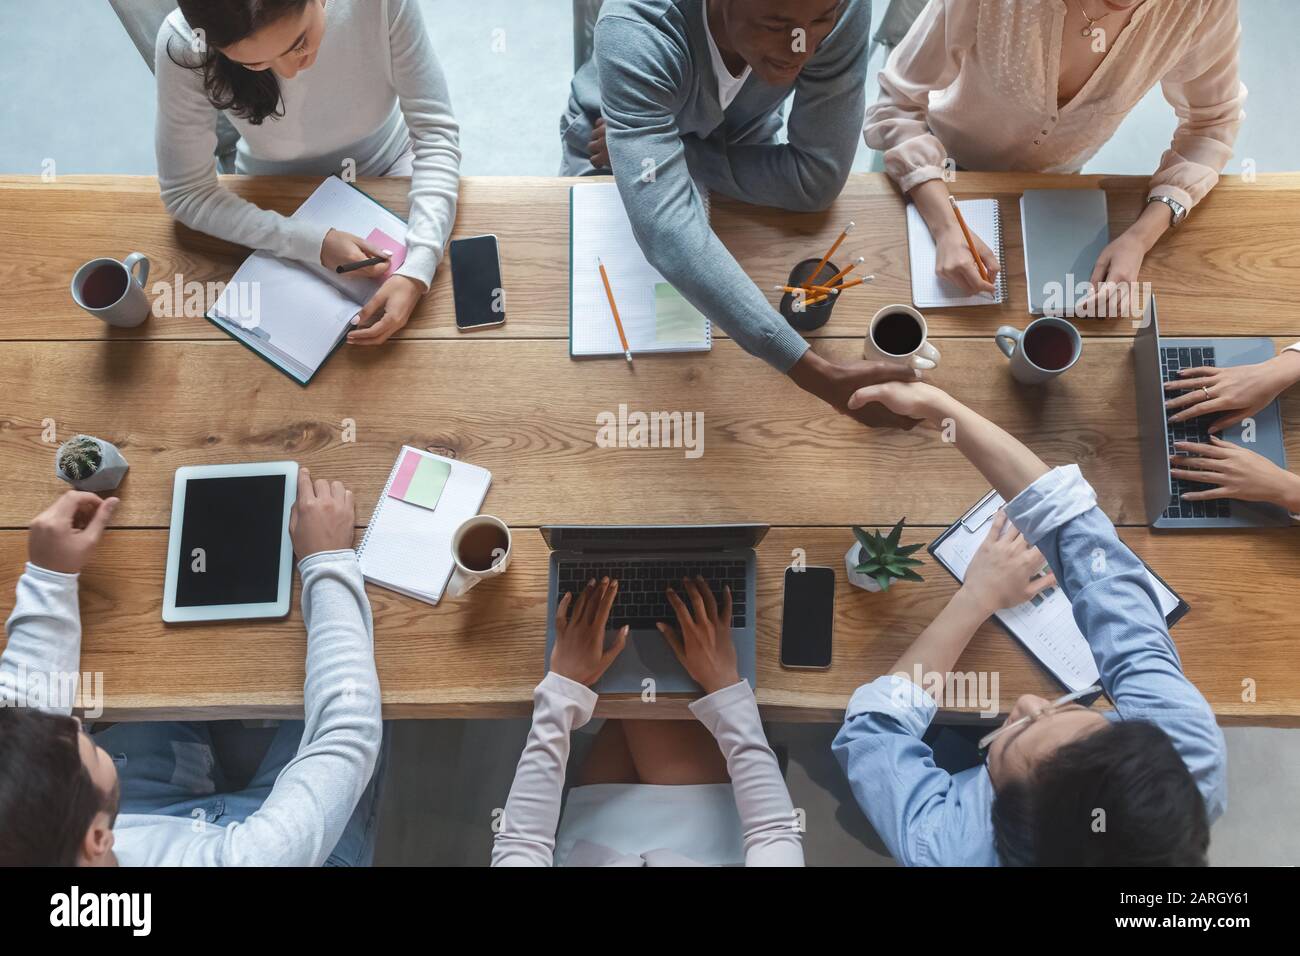 Top view of colleagues shaking hands during group business meeting Stock Photo